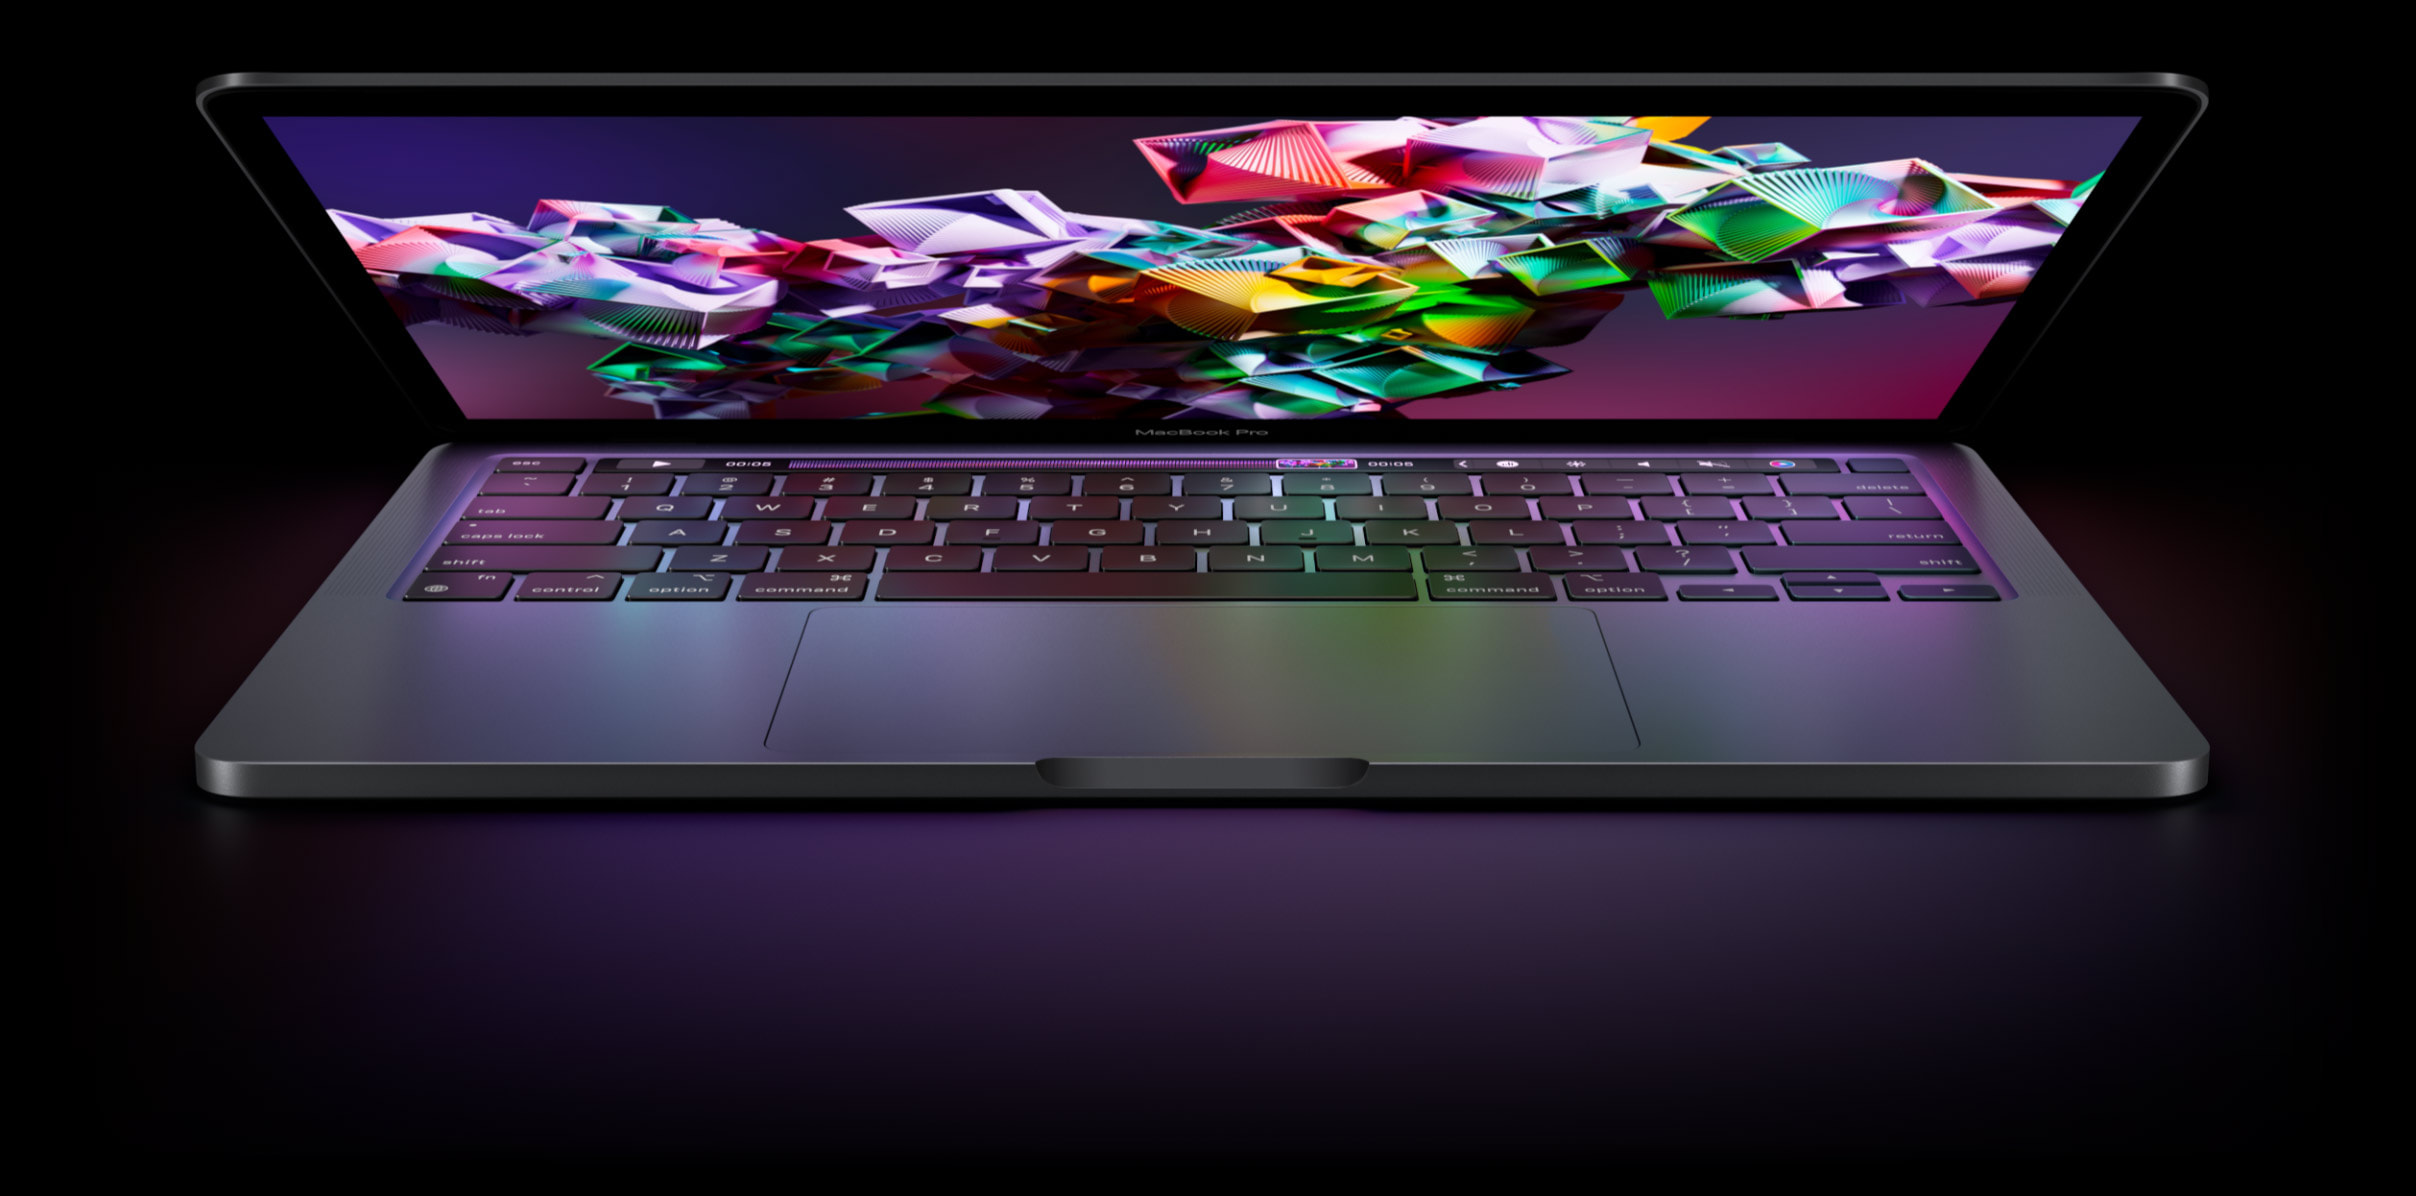 The new 13-inch MacBook Pro retains the same design but has an M2 processor. Issue price — $1300